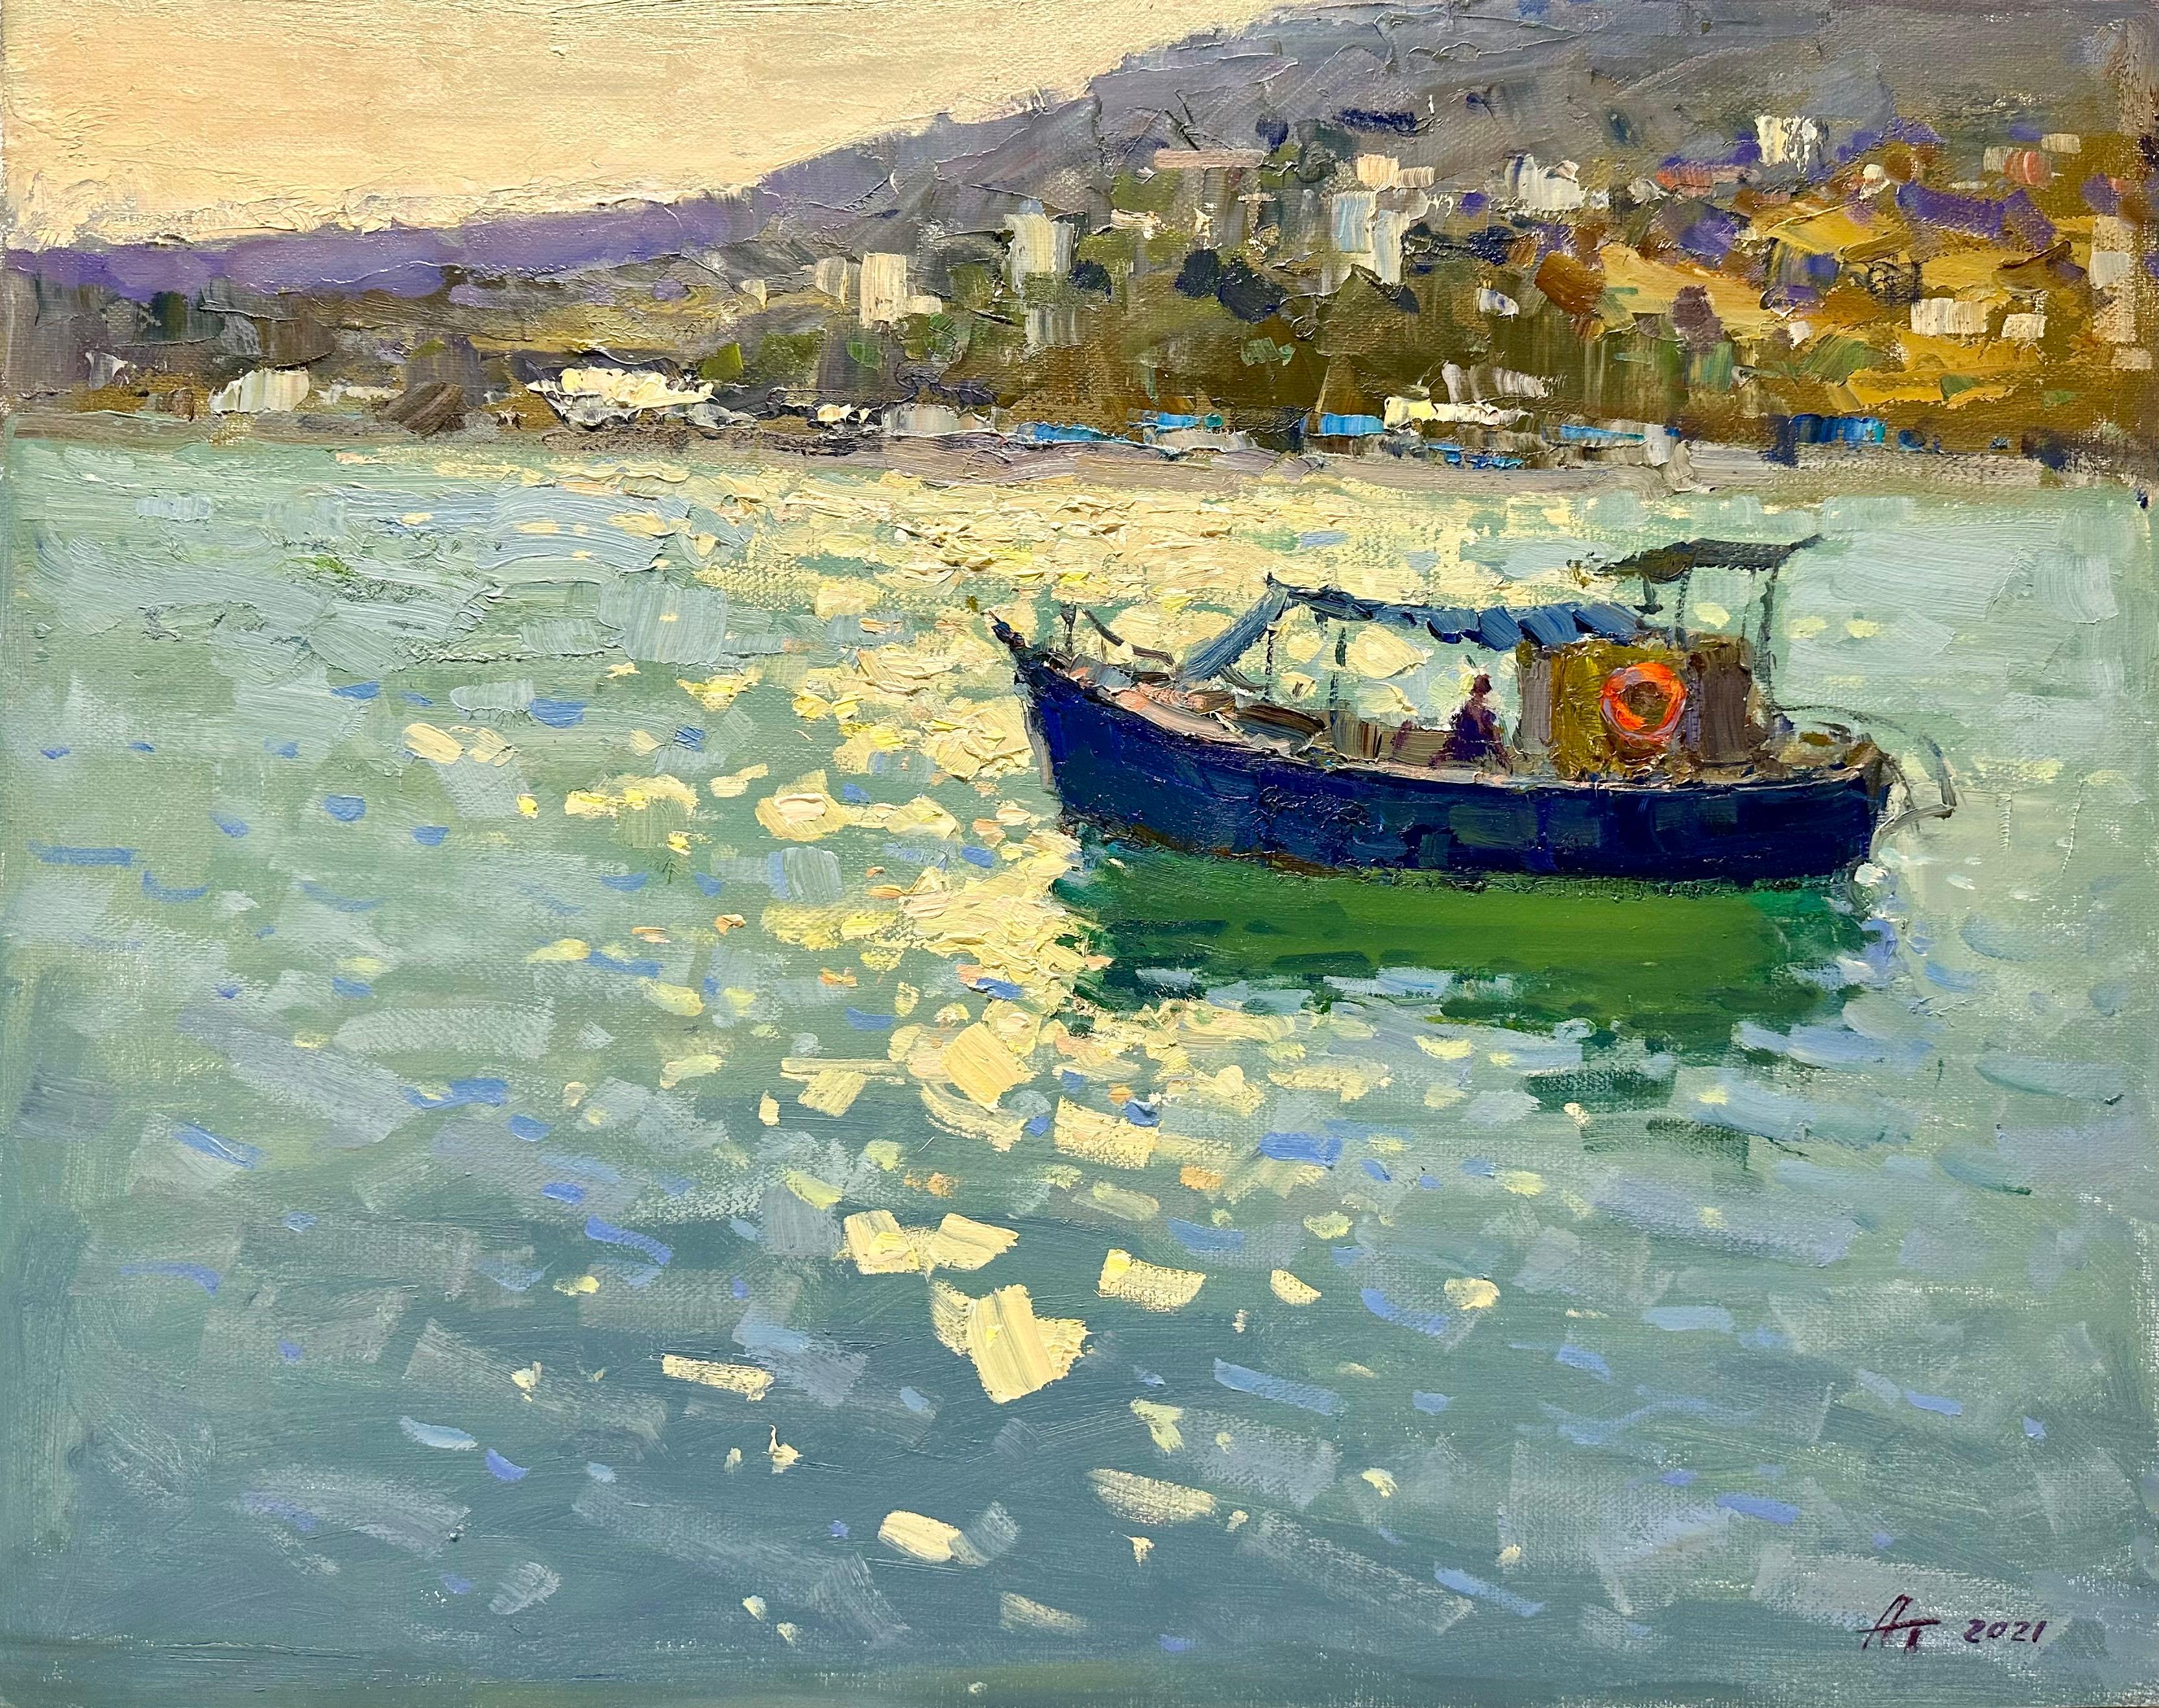 On the canvas of "Sea Voyage," there is a depiction of a small boat greeting a majestic sunset. The sun, hanging low, paints the sky in soft shades of delicate yellow and pink. The reflection of sunlight on the sea's surface creates a gleam that